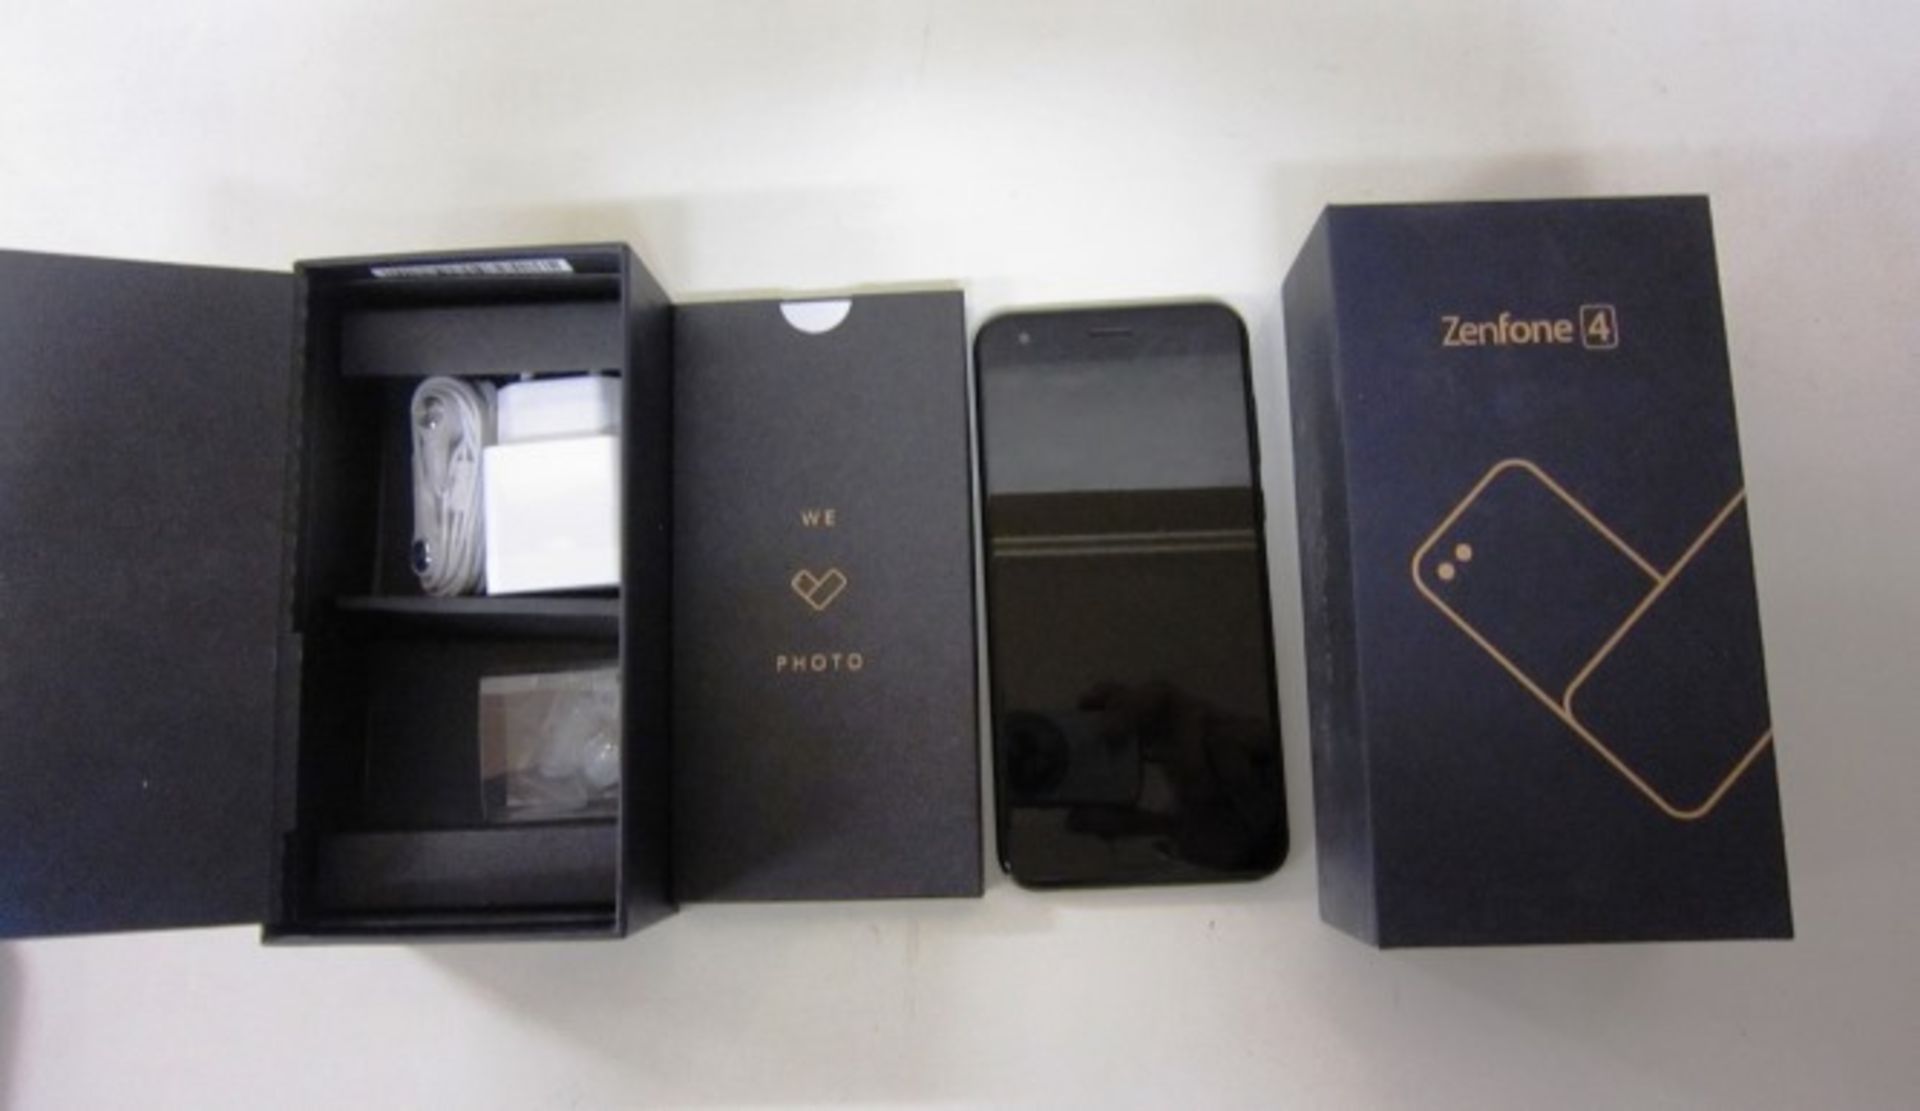 ASUS Zenphone 4 in black 64GB comes with protective case, earphones and european charger. Tested - Image 2 of 2